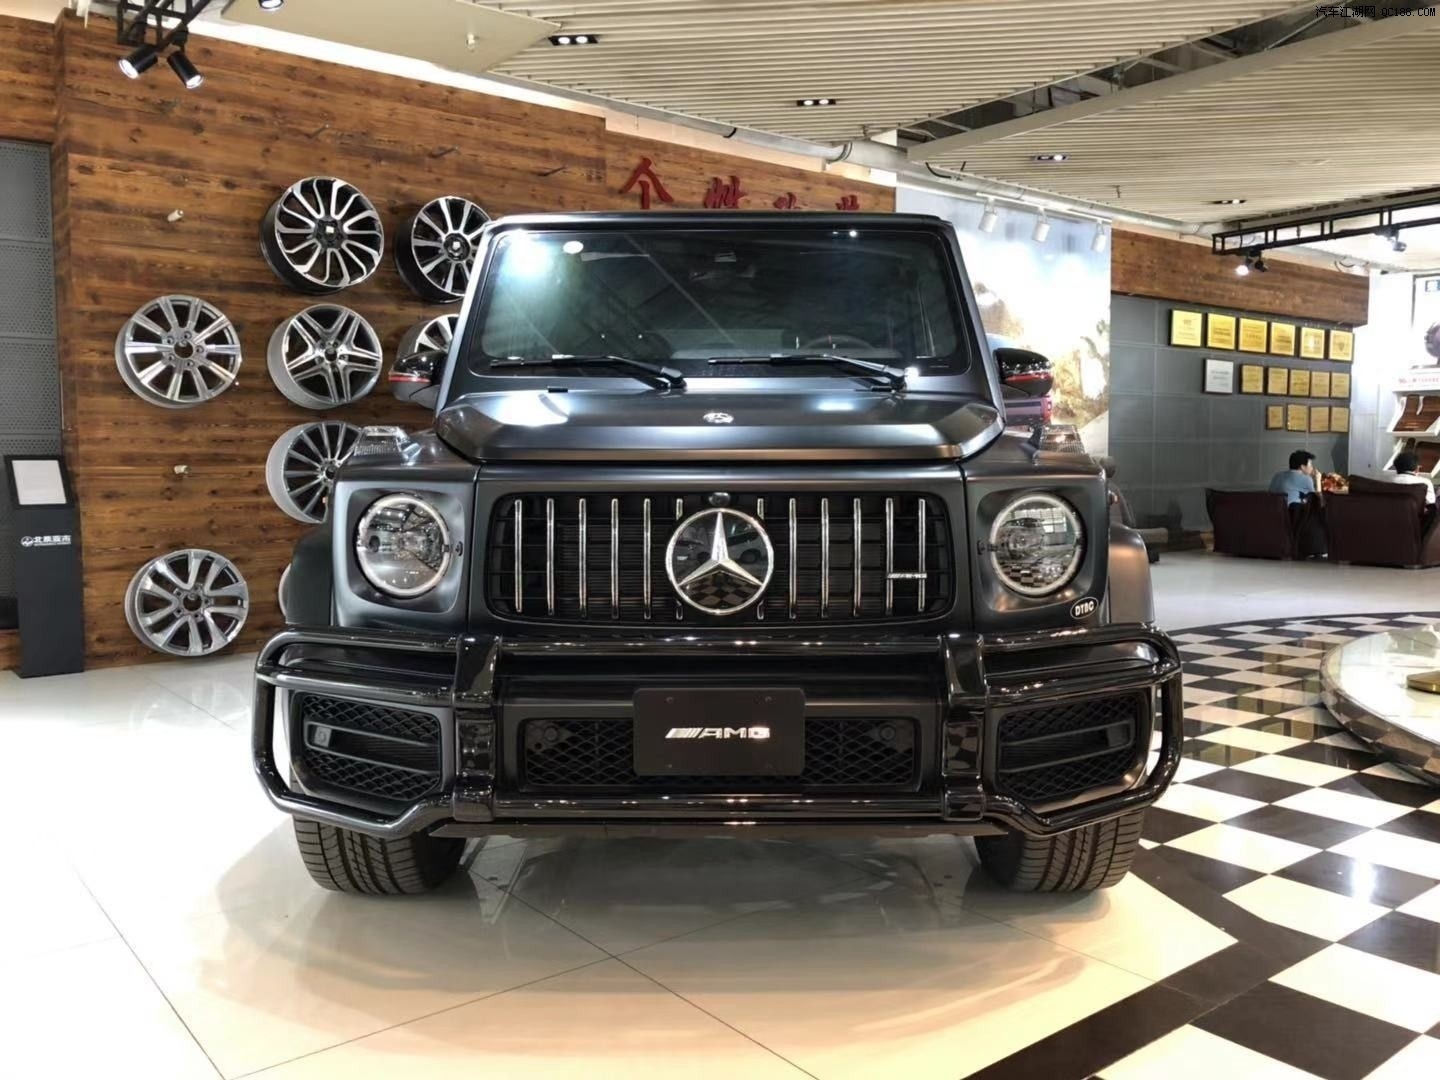 2019Ӱ汼G63 